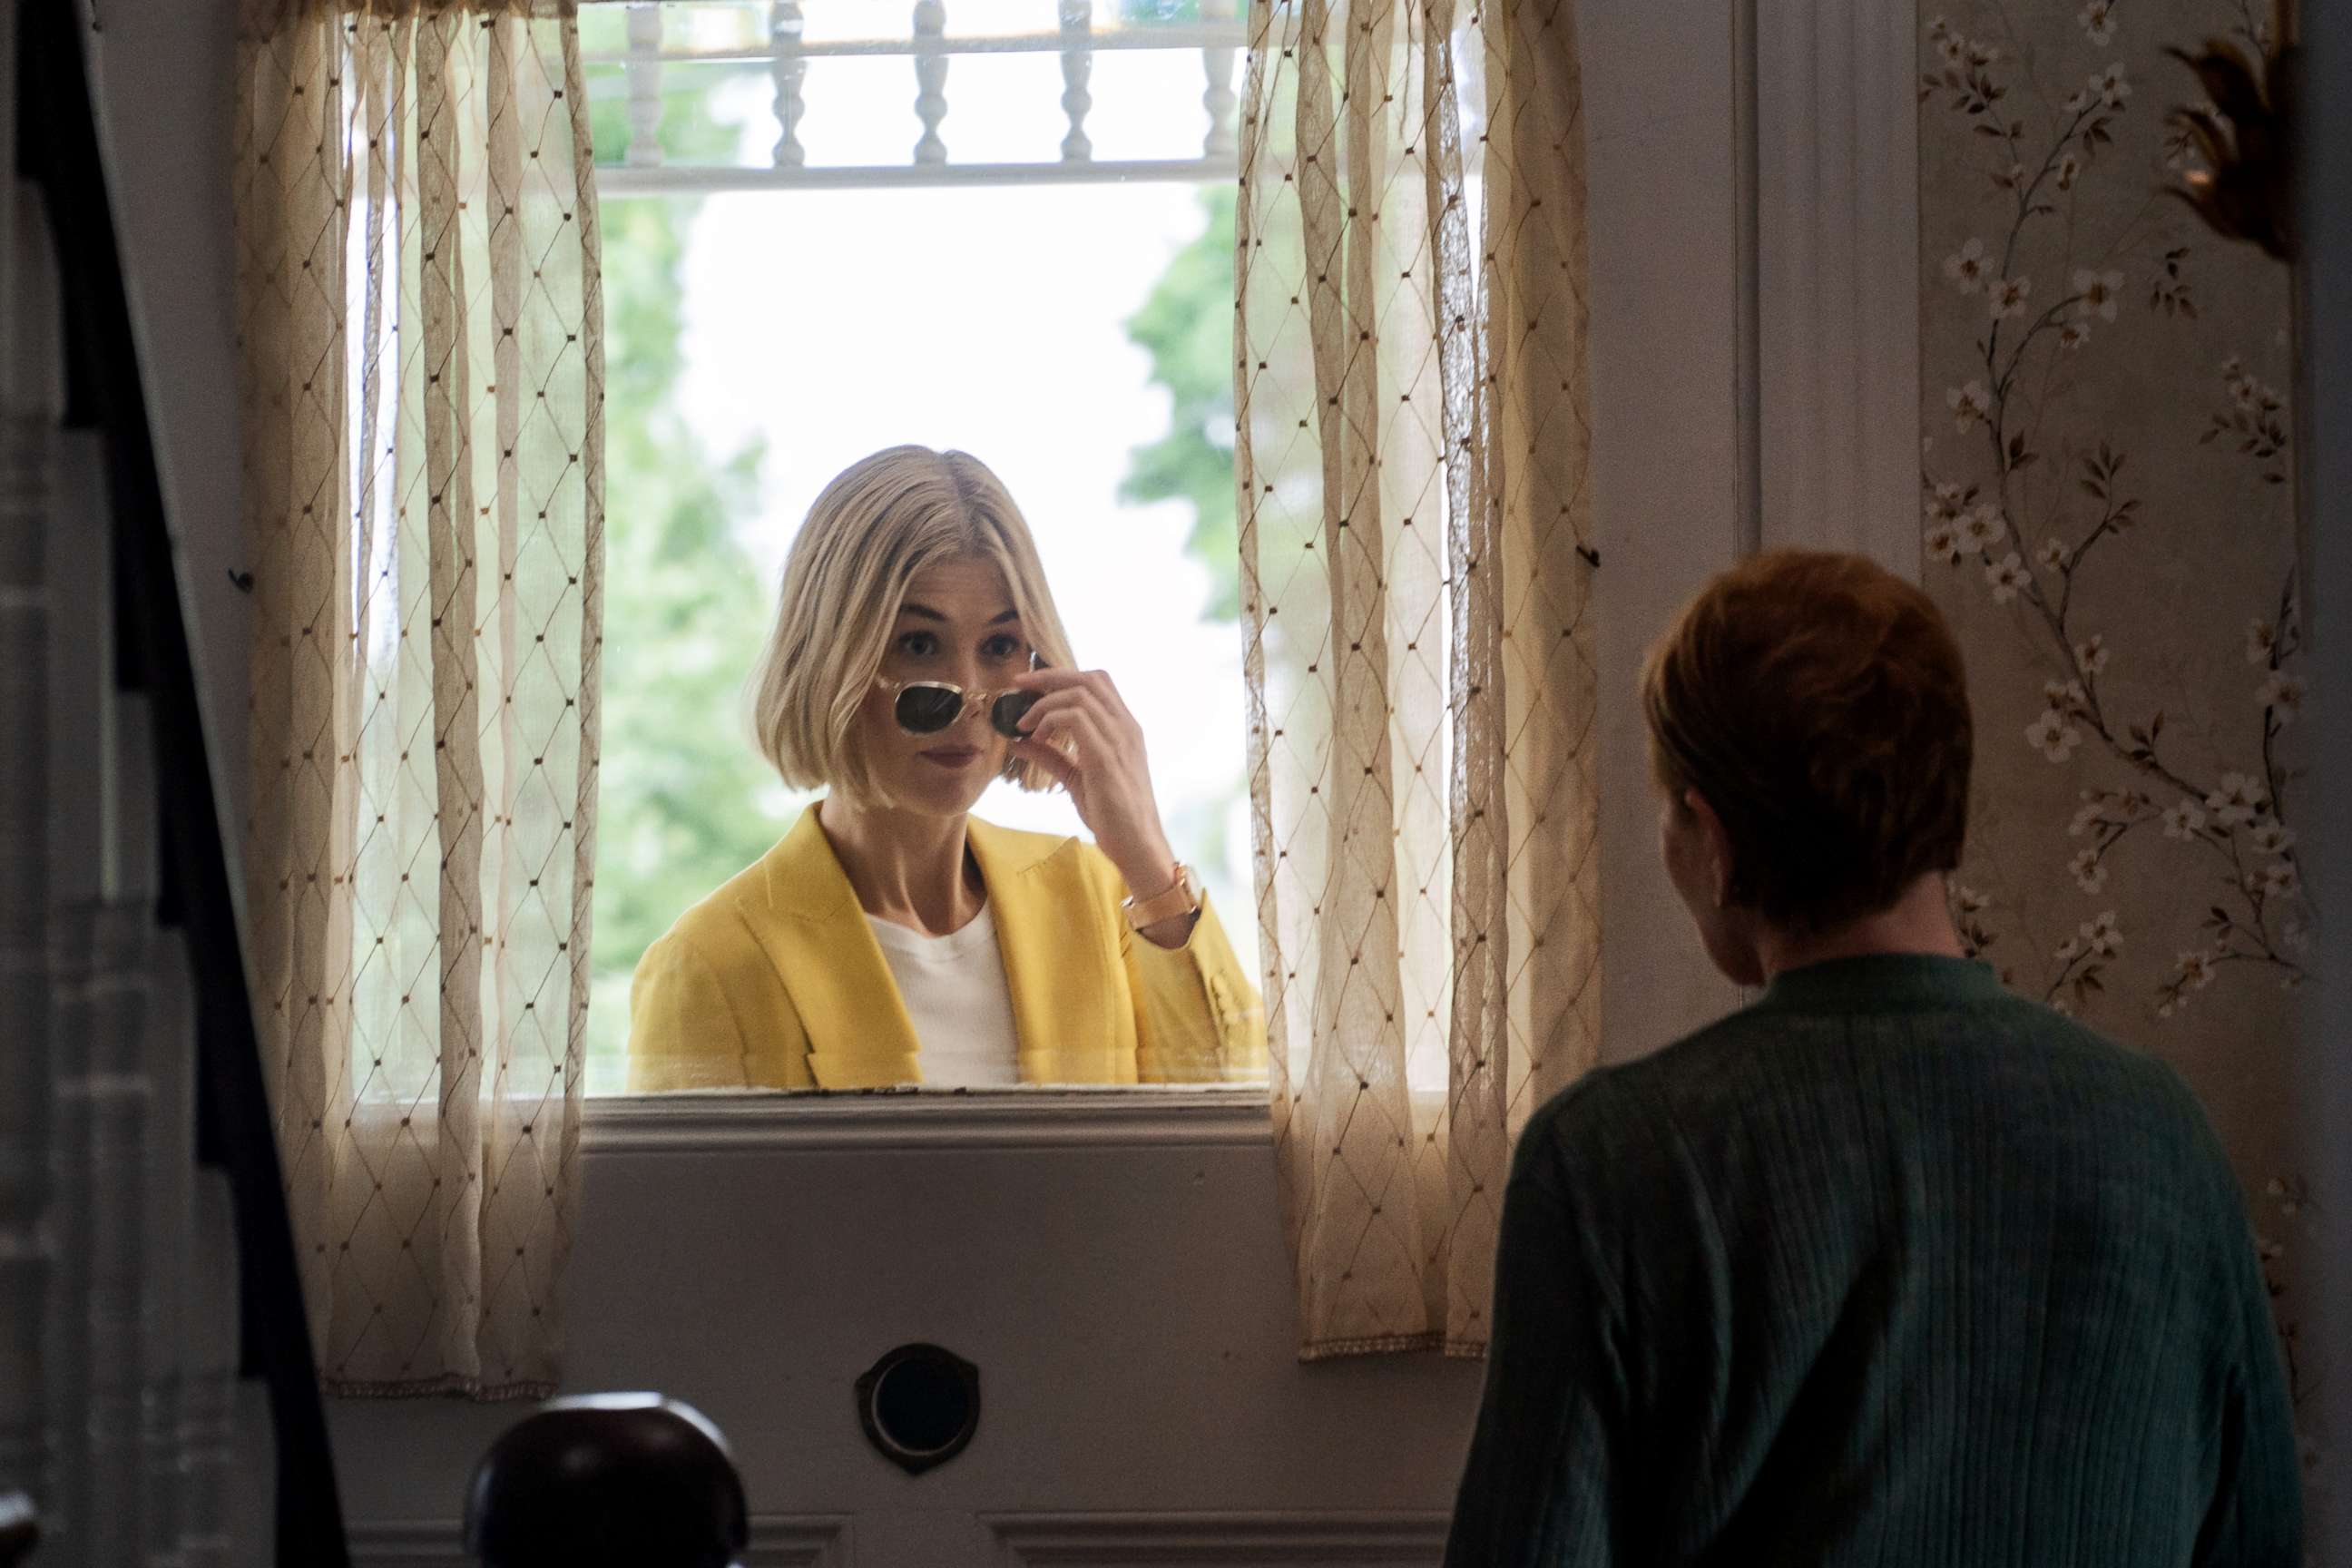 PHOTO: Rosamund Pike and Dianne Wiest in a scene from "I Care a Lot."